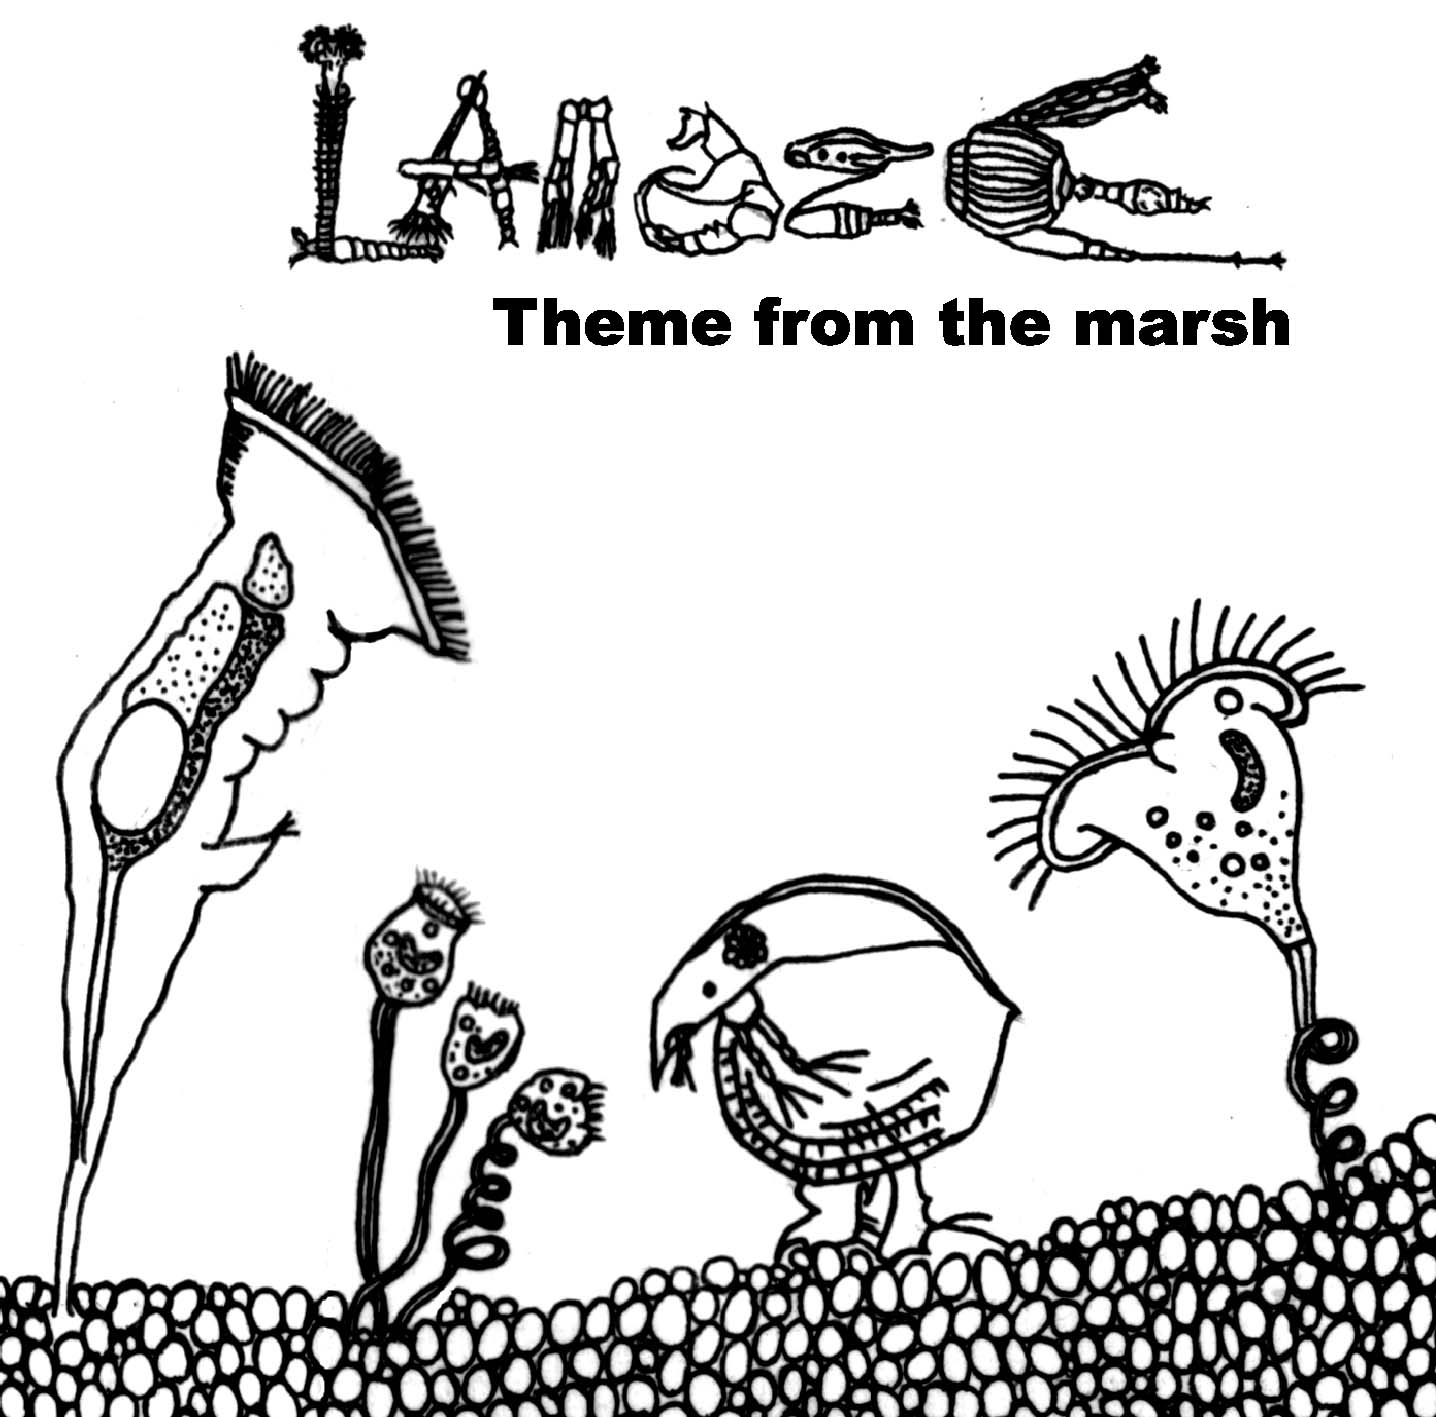 Theme from the marsh